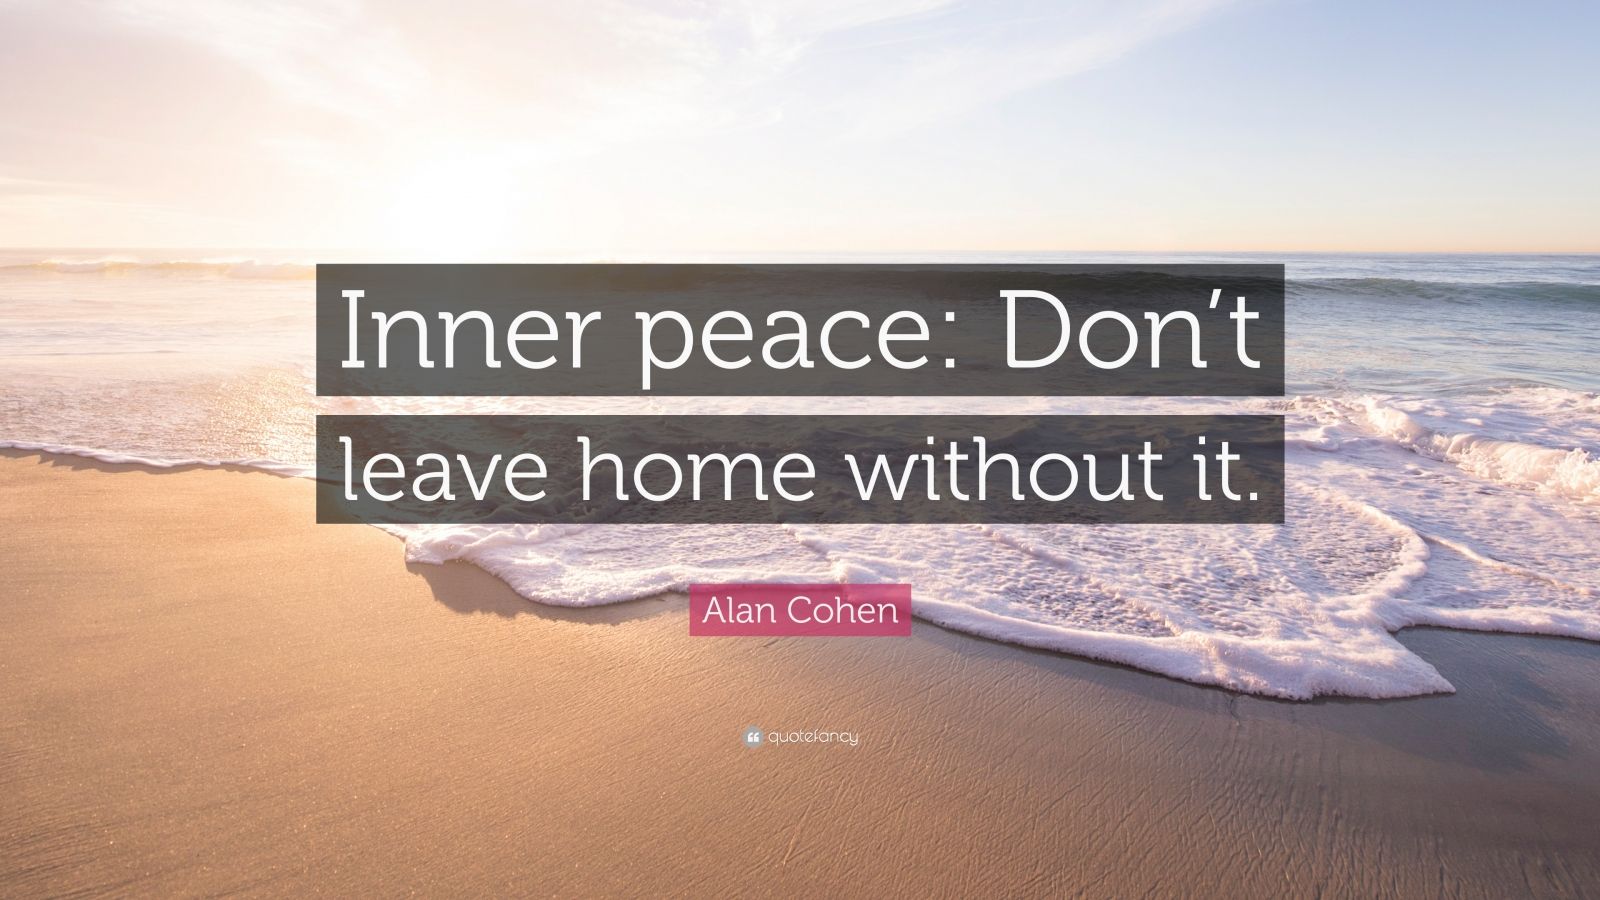 Alan Cohen Quote “Inner peace Don’t leave home without it.” (7